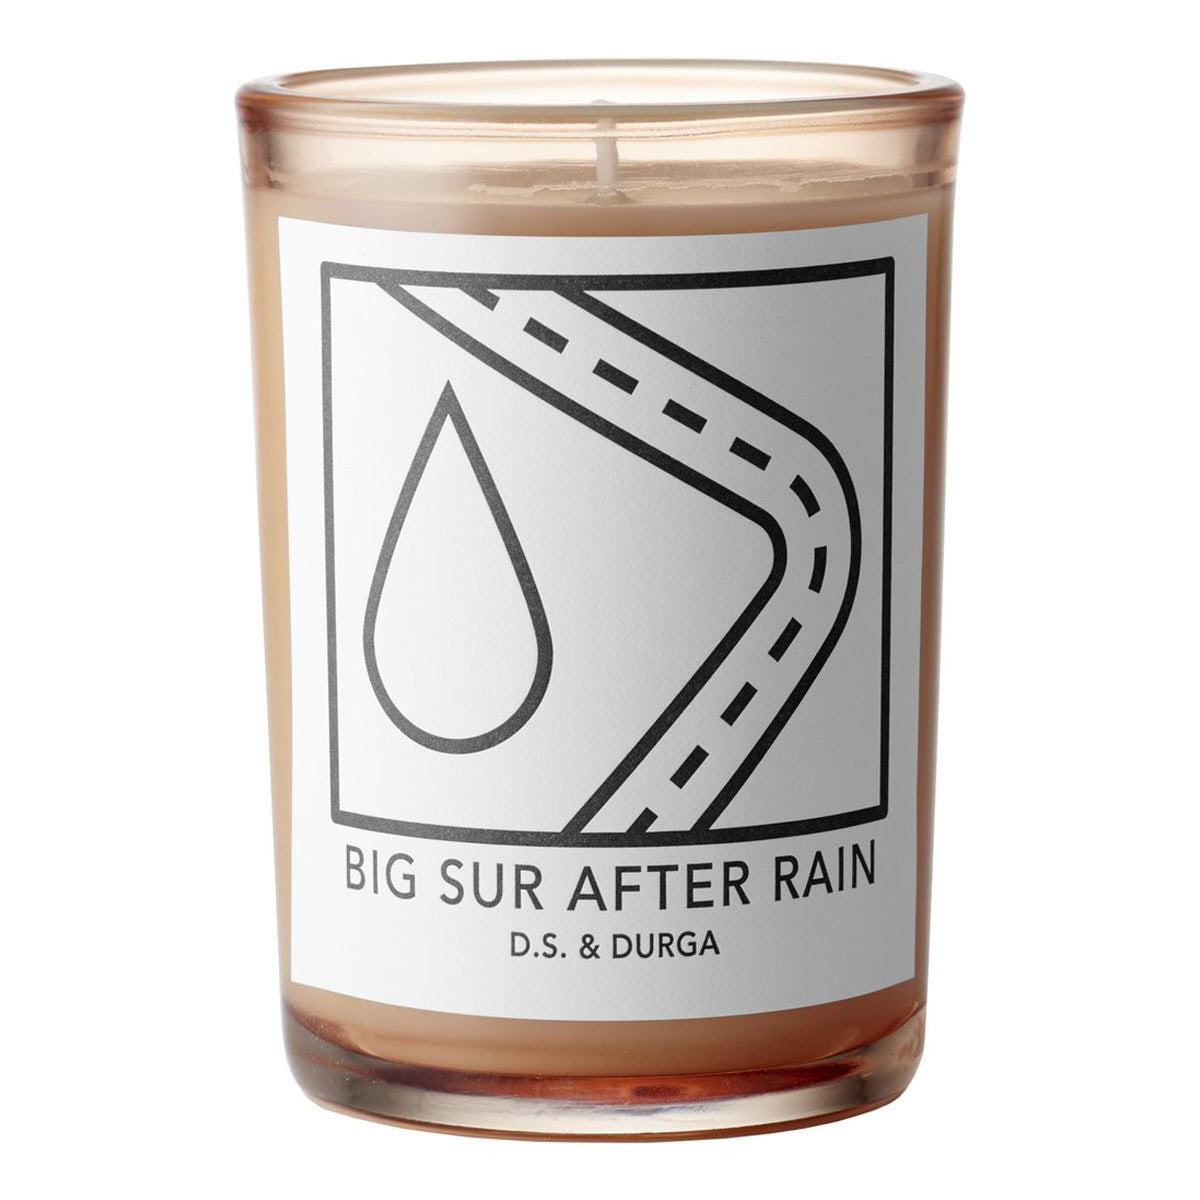 Primary image of Big Sur After Rain Candle